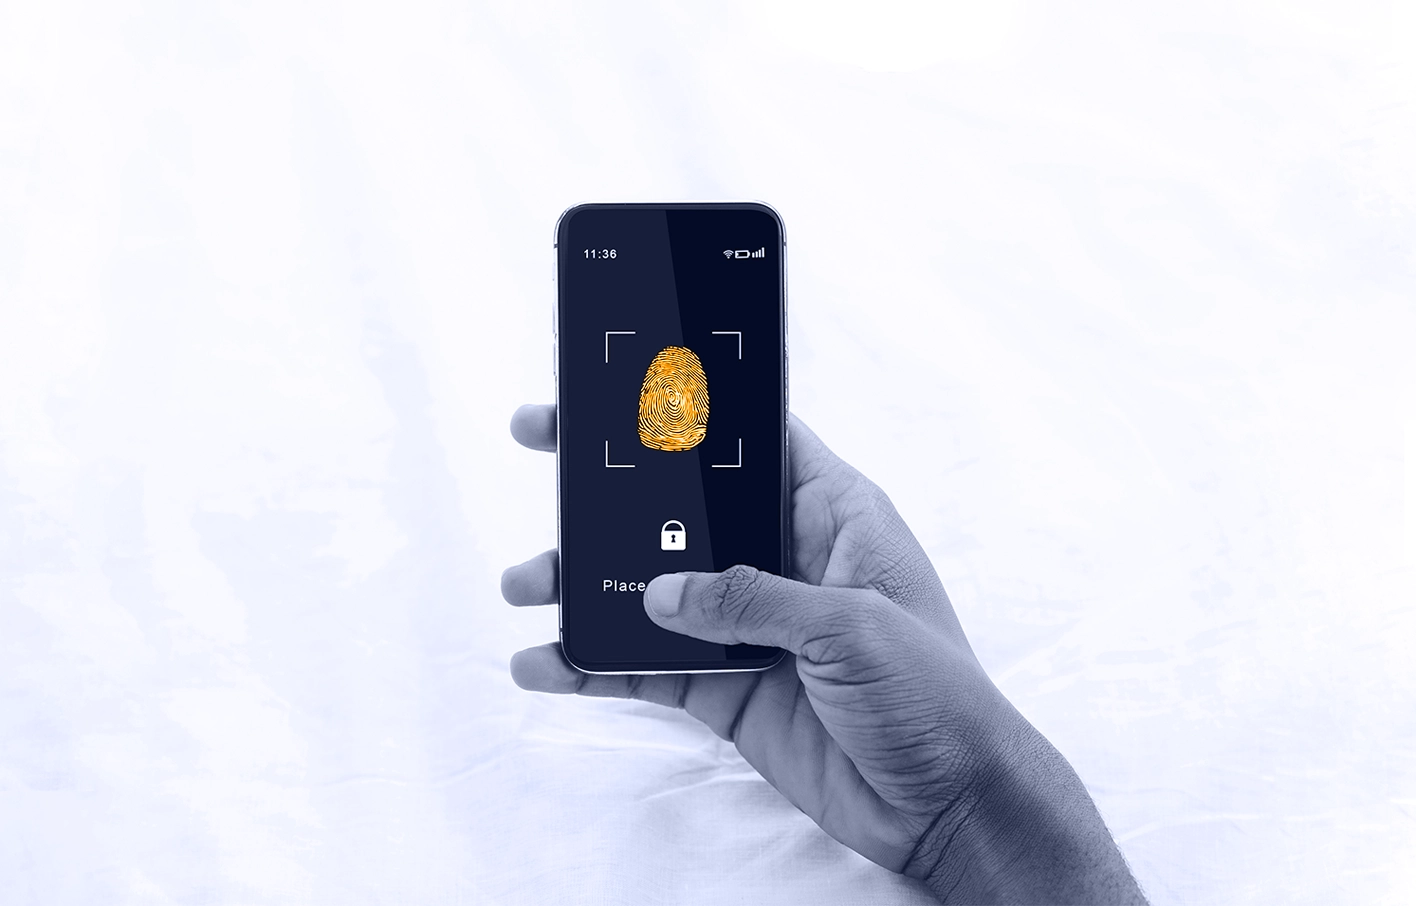 Mobile phone with finger print scanner